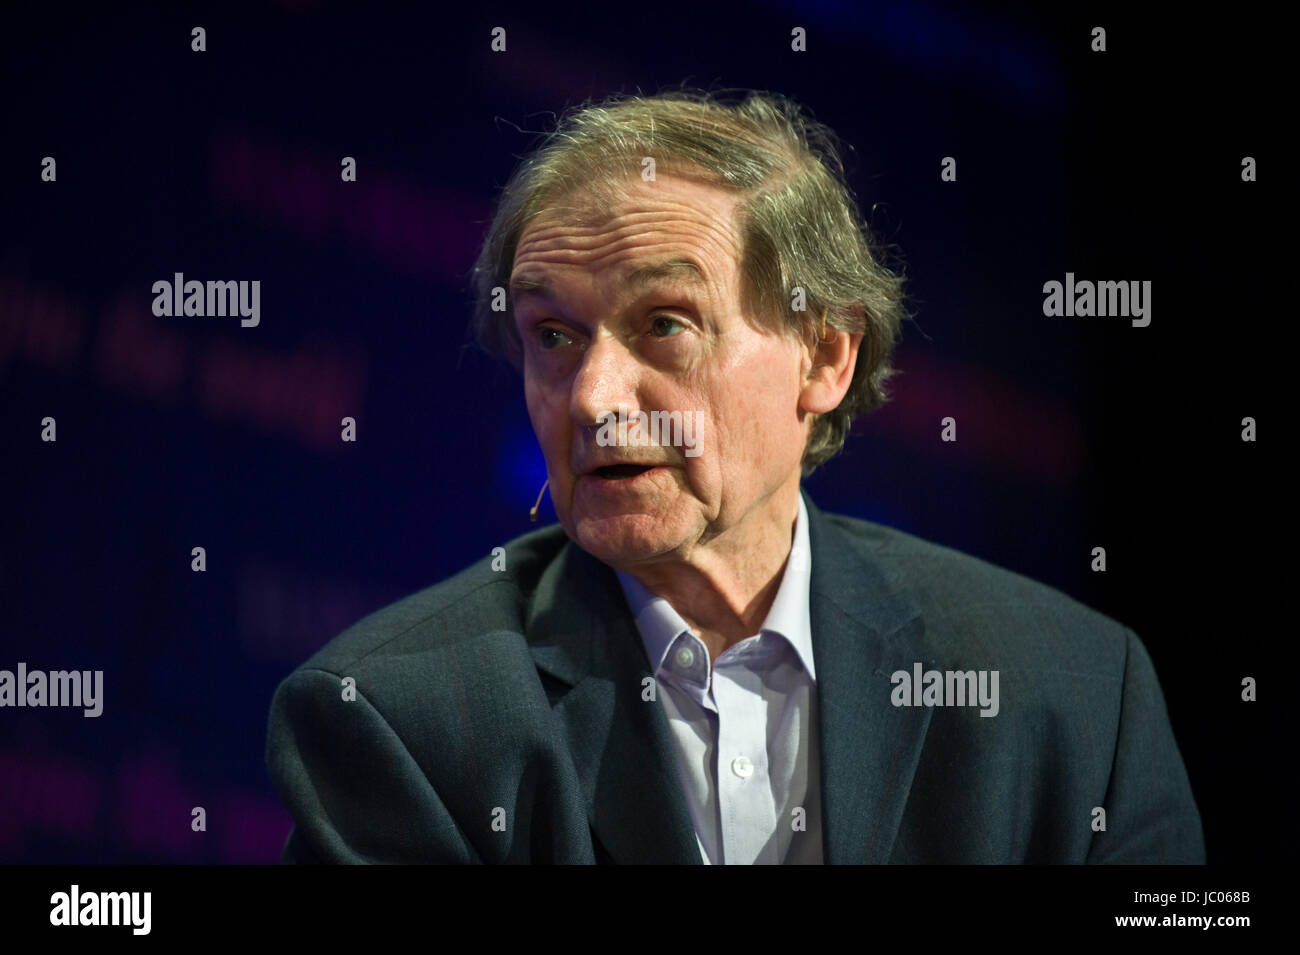 Roger Penrose theoretical physicist speaking on stage at Hay Festival of Literature and the Arts 2017 Hay-on-Wye Powys Wales UK Stock Photo